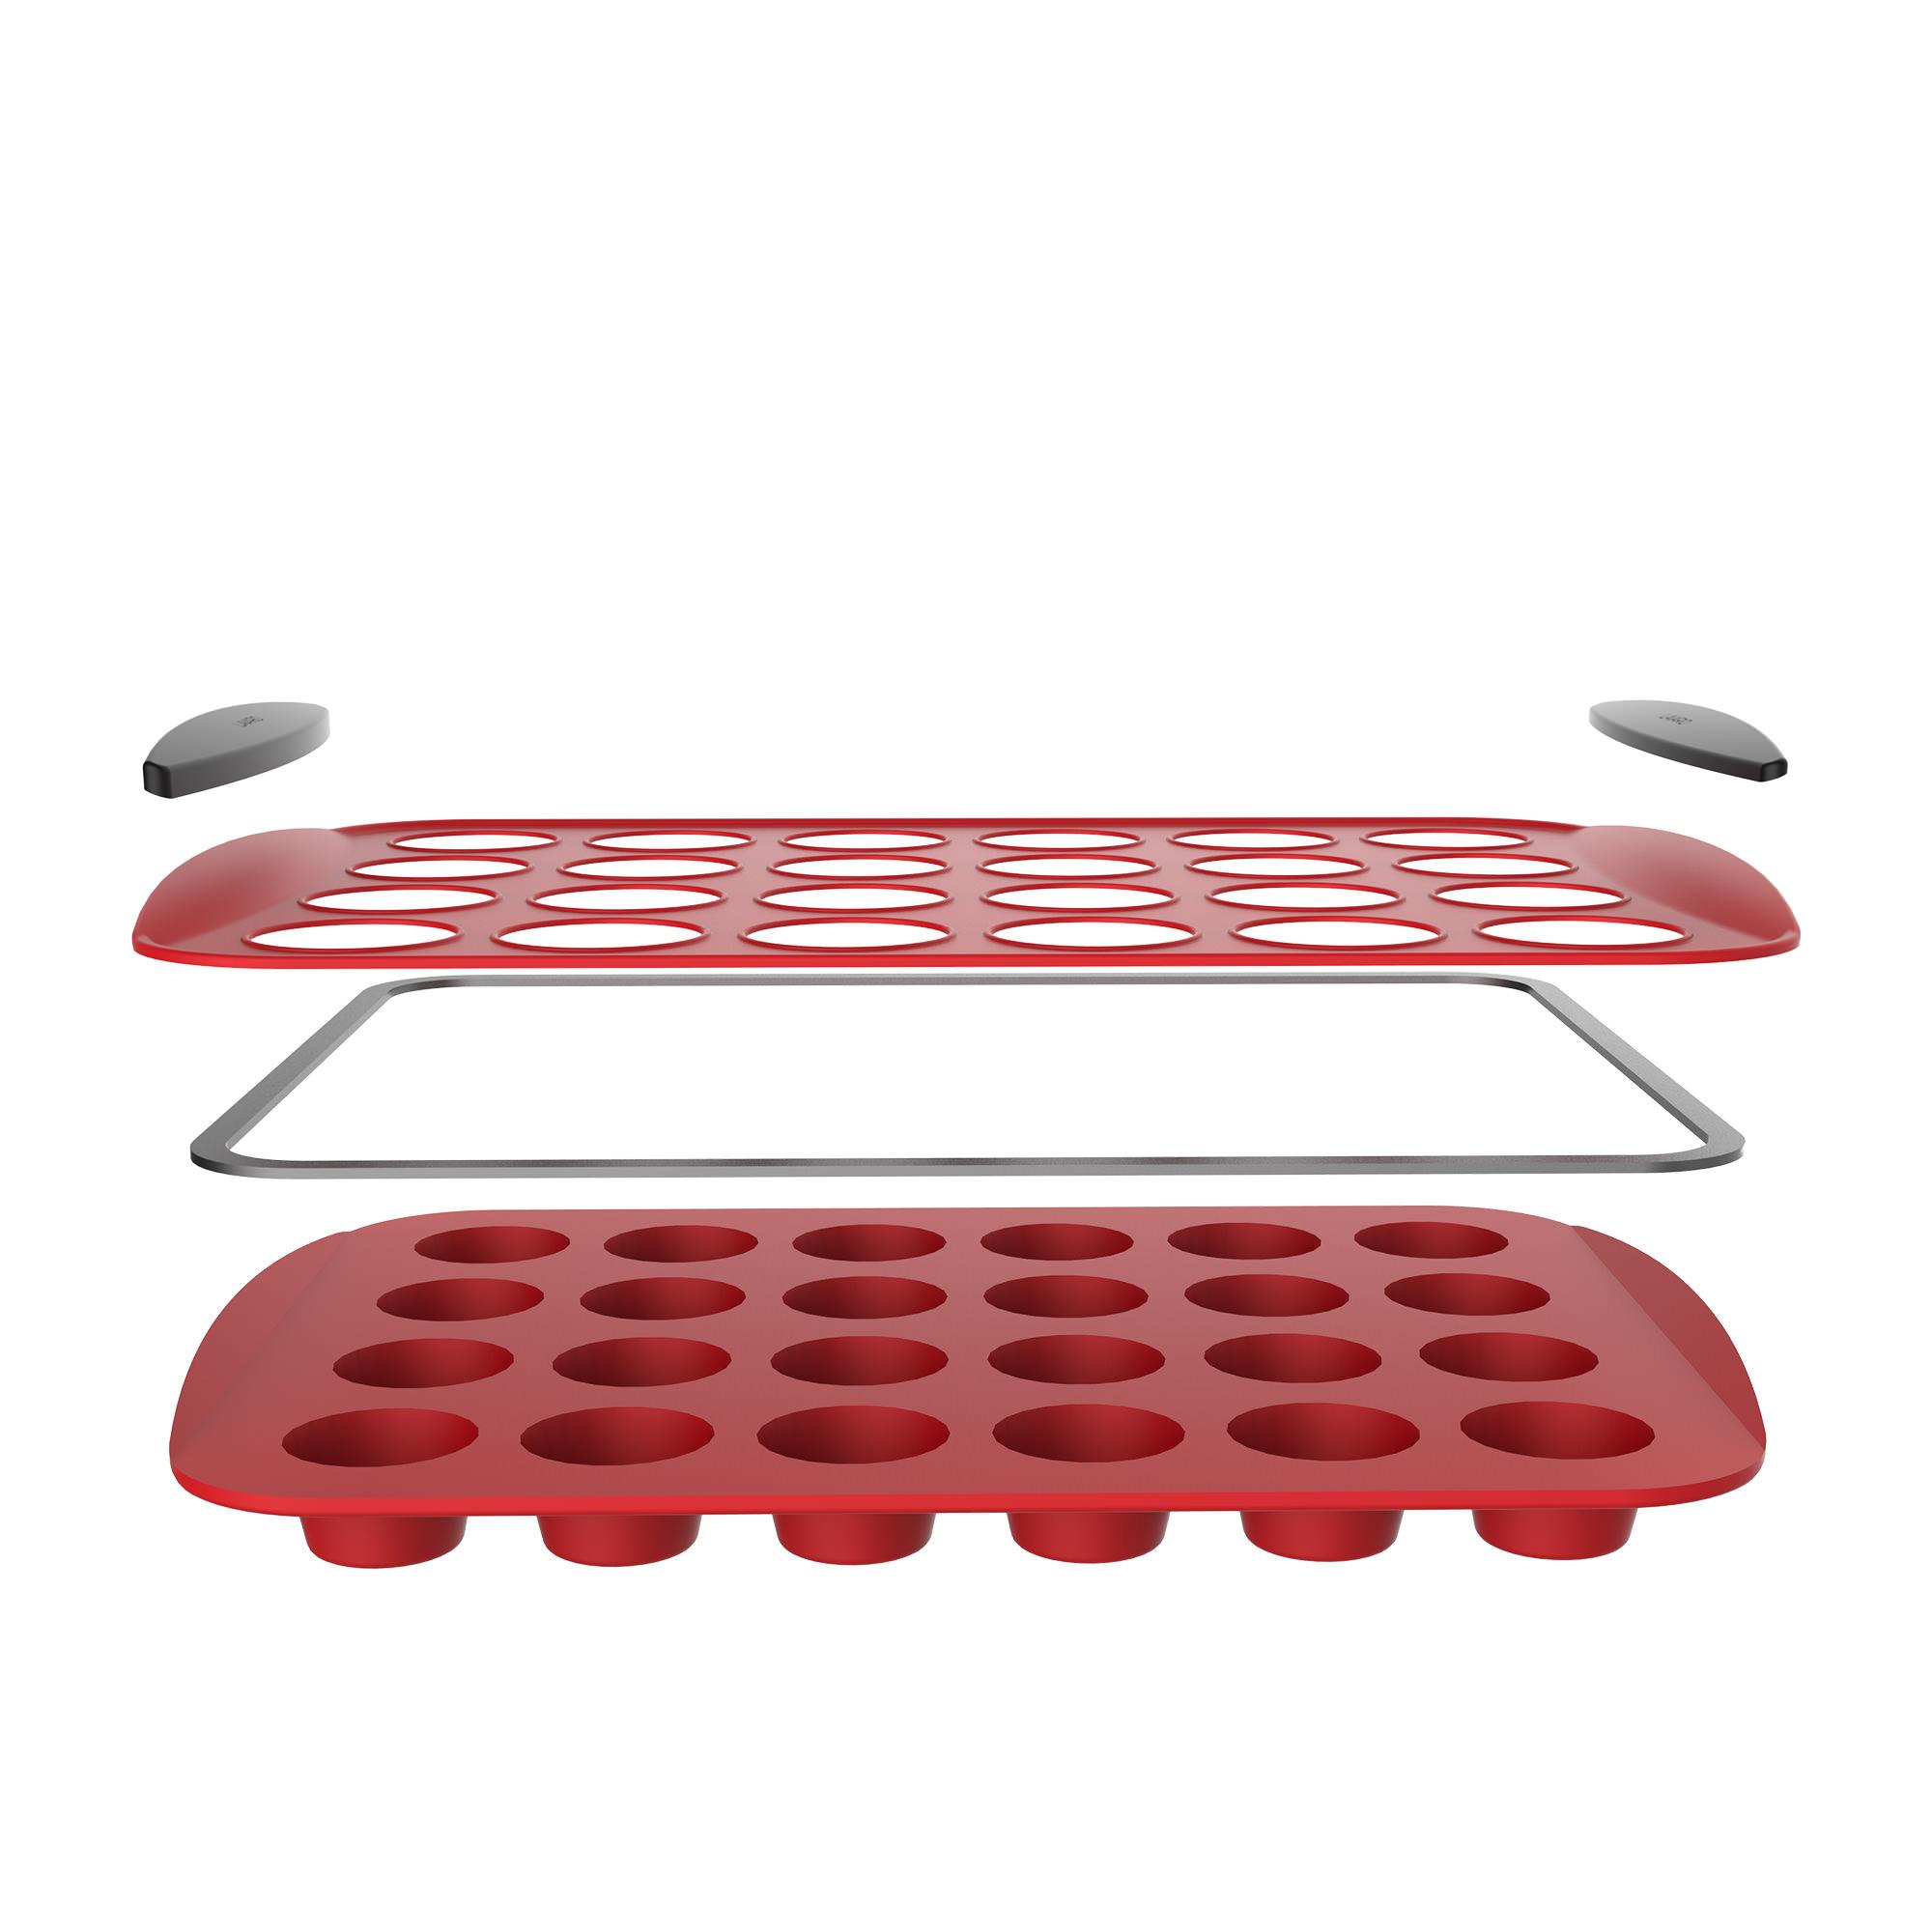 Daily Bake Silicone Mini Muffin Pan 24 Cup Red Image 3